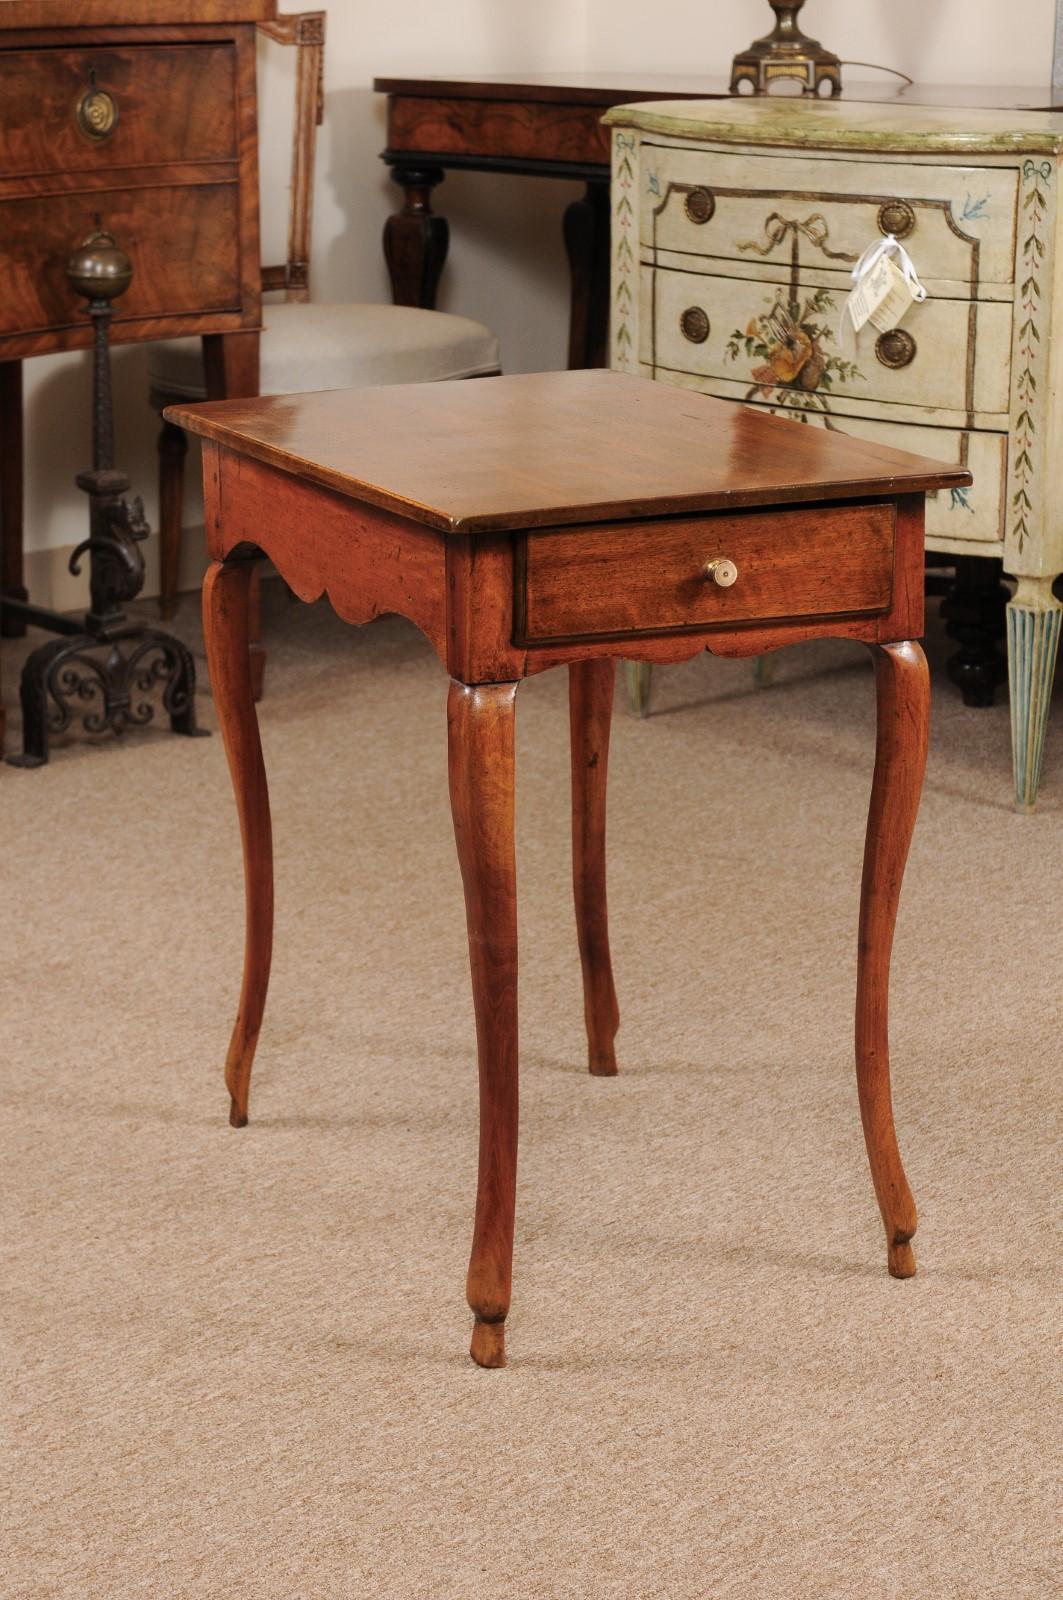 The petite French Louis XV side table in walnut with rectangular one piece top, carved shaped apron below with drawer and cabriole legs ending in hoofed feet. The top has been replaced at a later date.